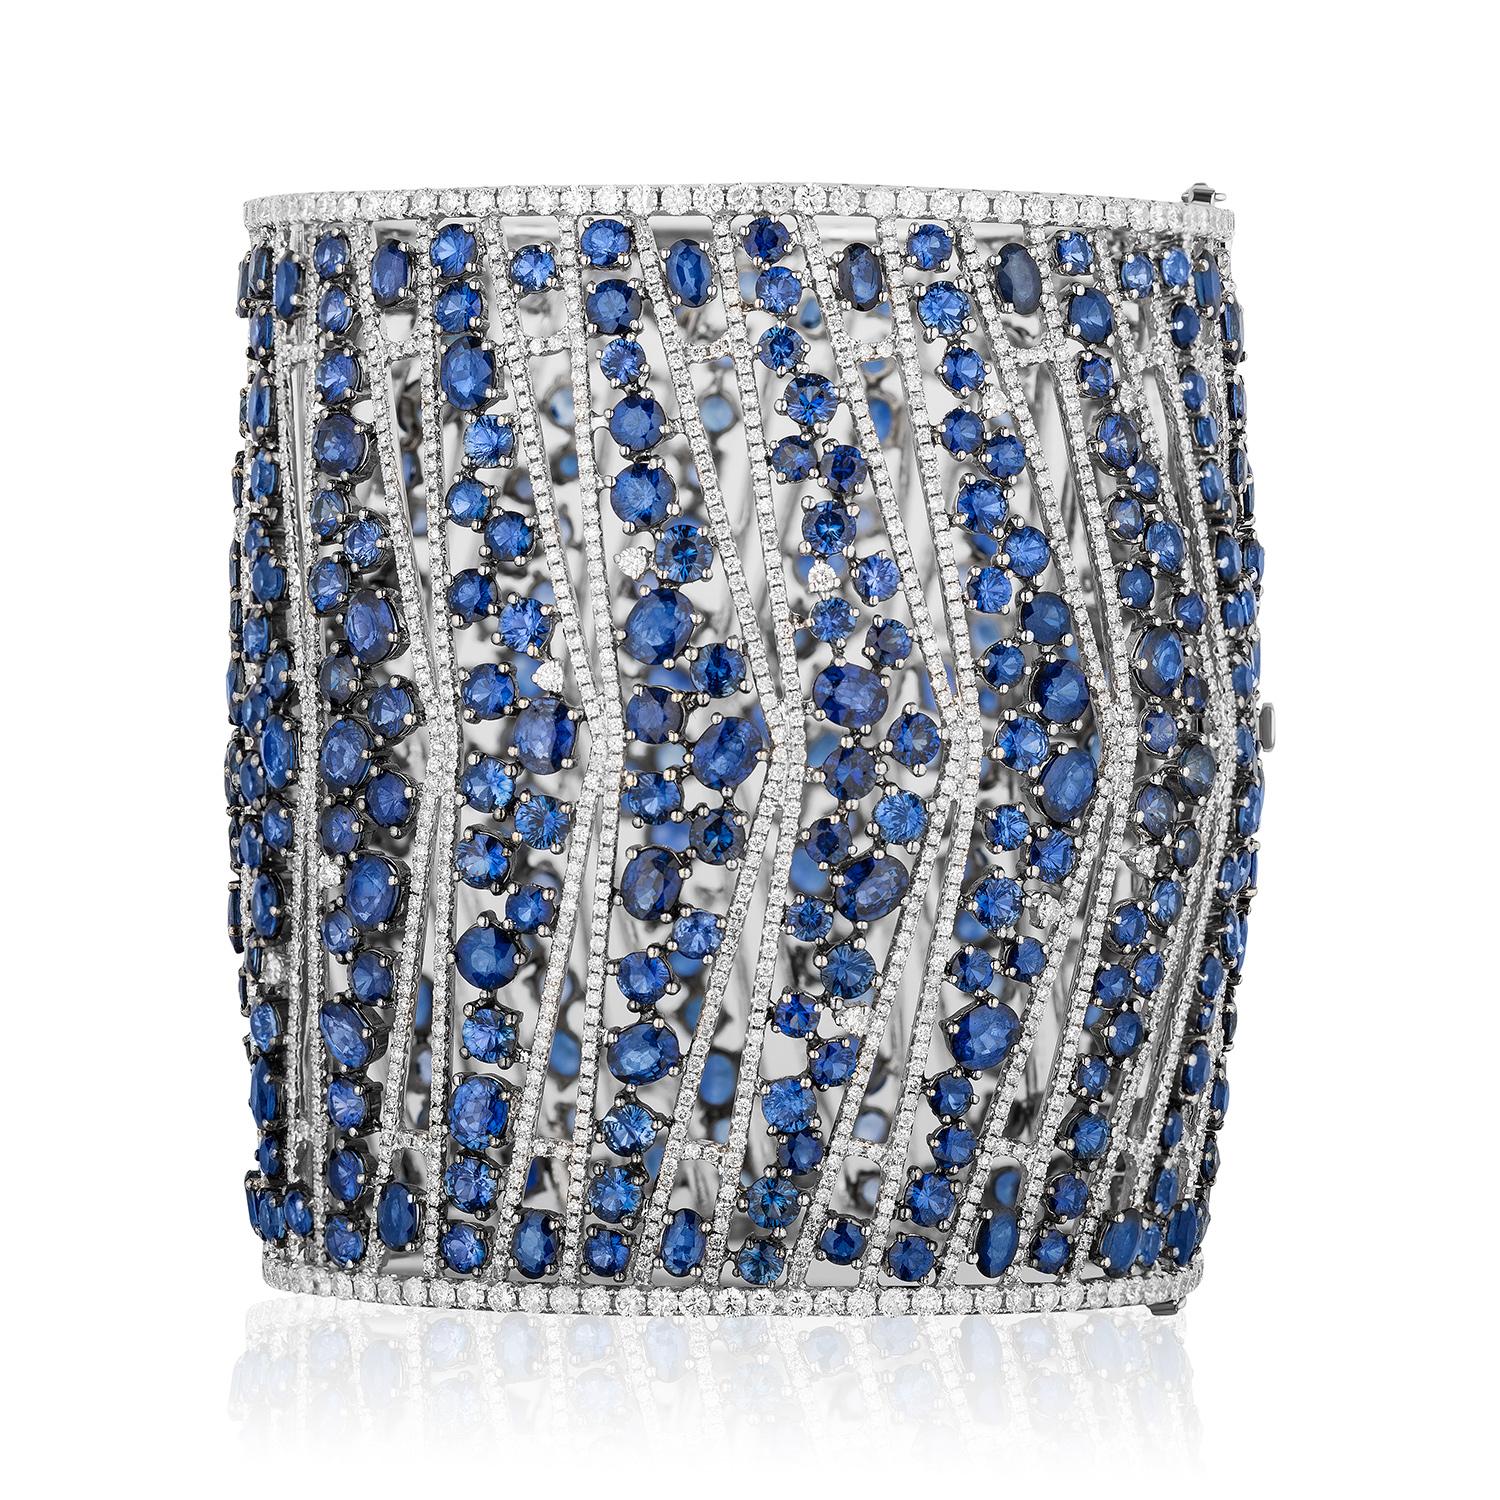 Beautiful and Unique Wide Cuff Bangle.

Featuring a cascade of Round, Oval and Cushion Sapphires of different blue hues weighing 94.10 Carats.
Spaced with clean white lines of Round Brilliant Diamonds weighing 15.80 Carats.

109.90 Carat Total